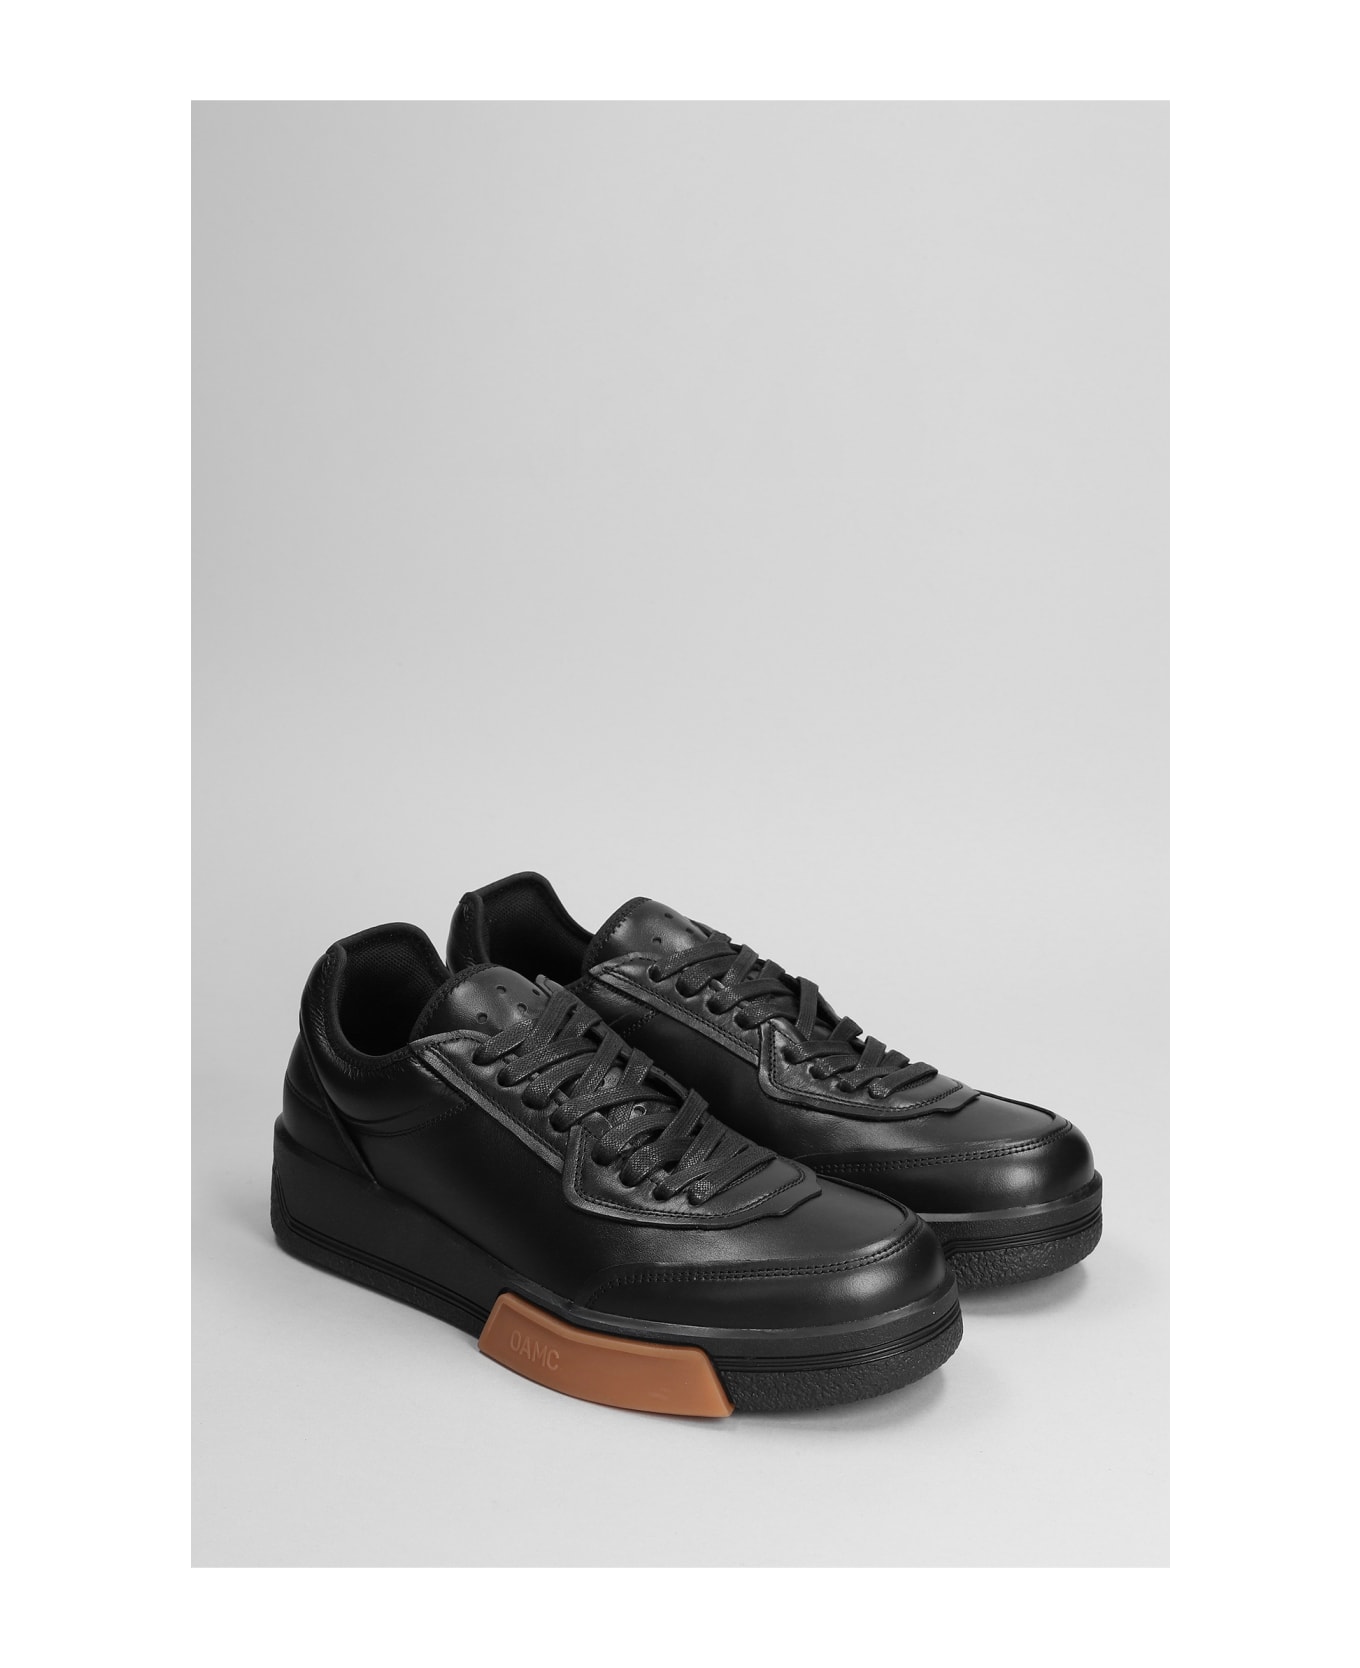 OAMC Cosmos Sneakers In Black Leather スニーカー